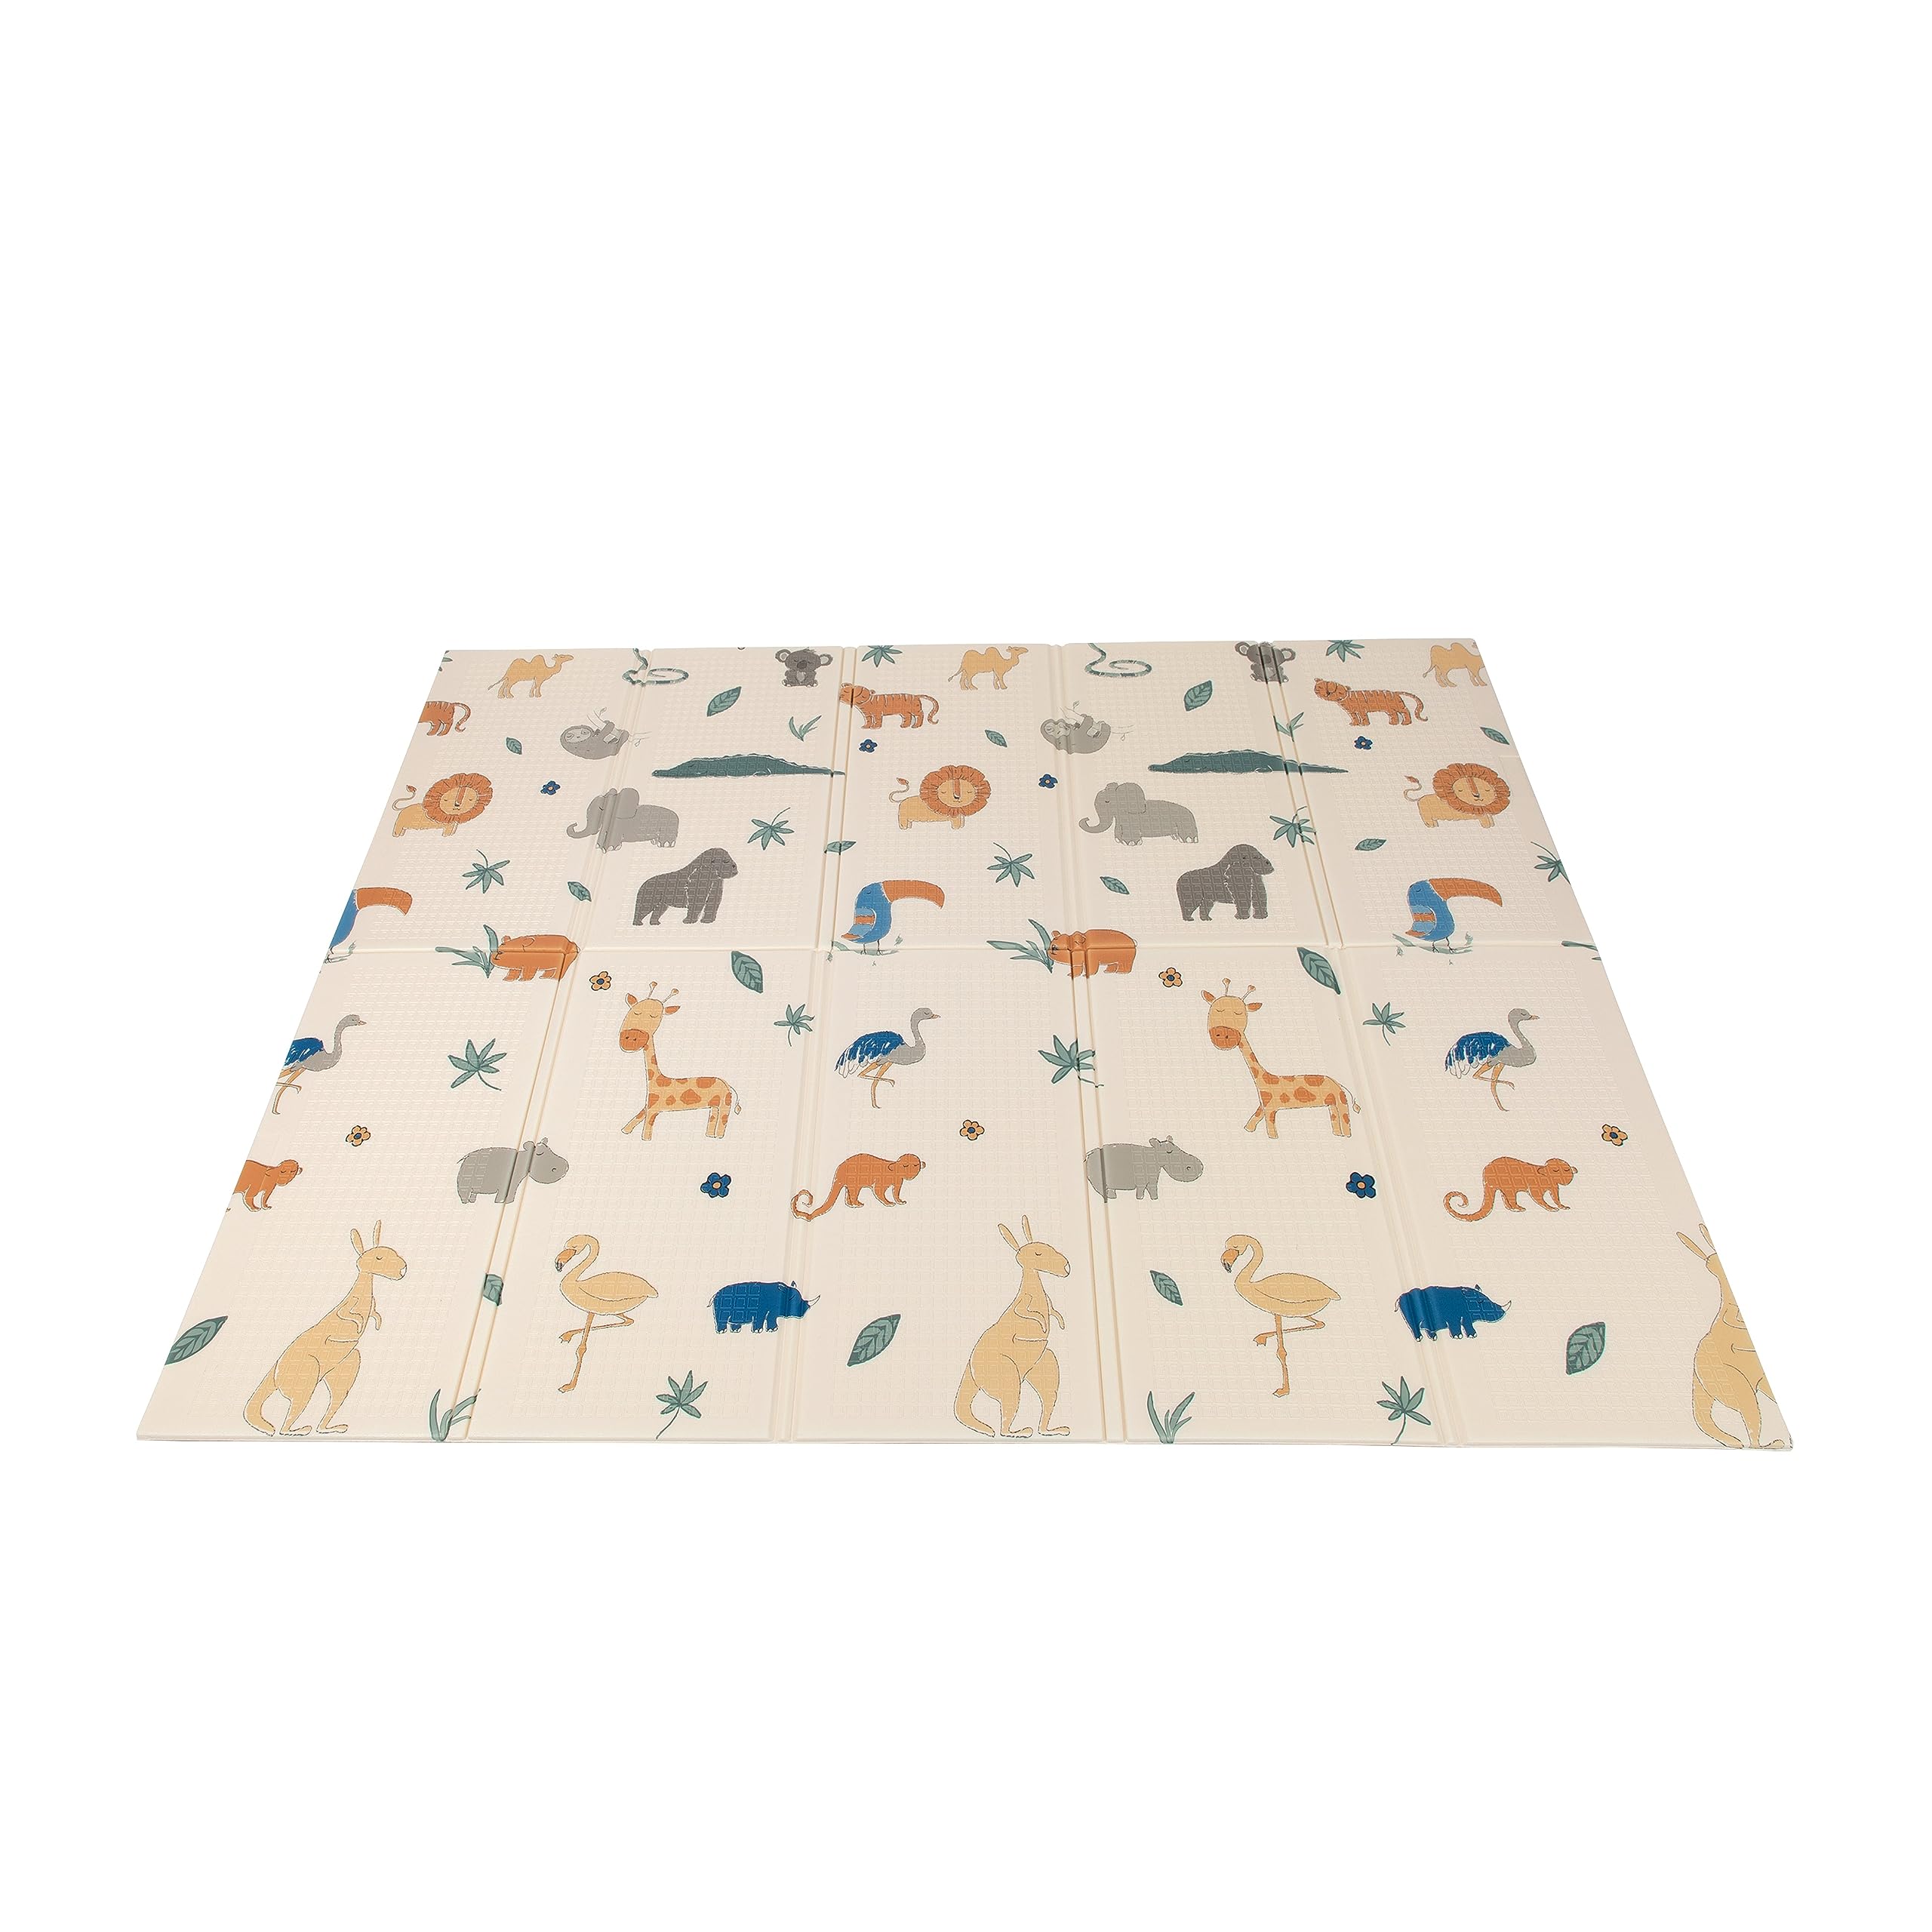 Nuby Reversible Soft Floor Mat, Foldable and Lightweight for Easy Storage and Travel, Safari